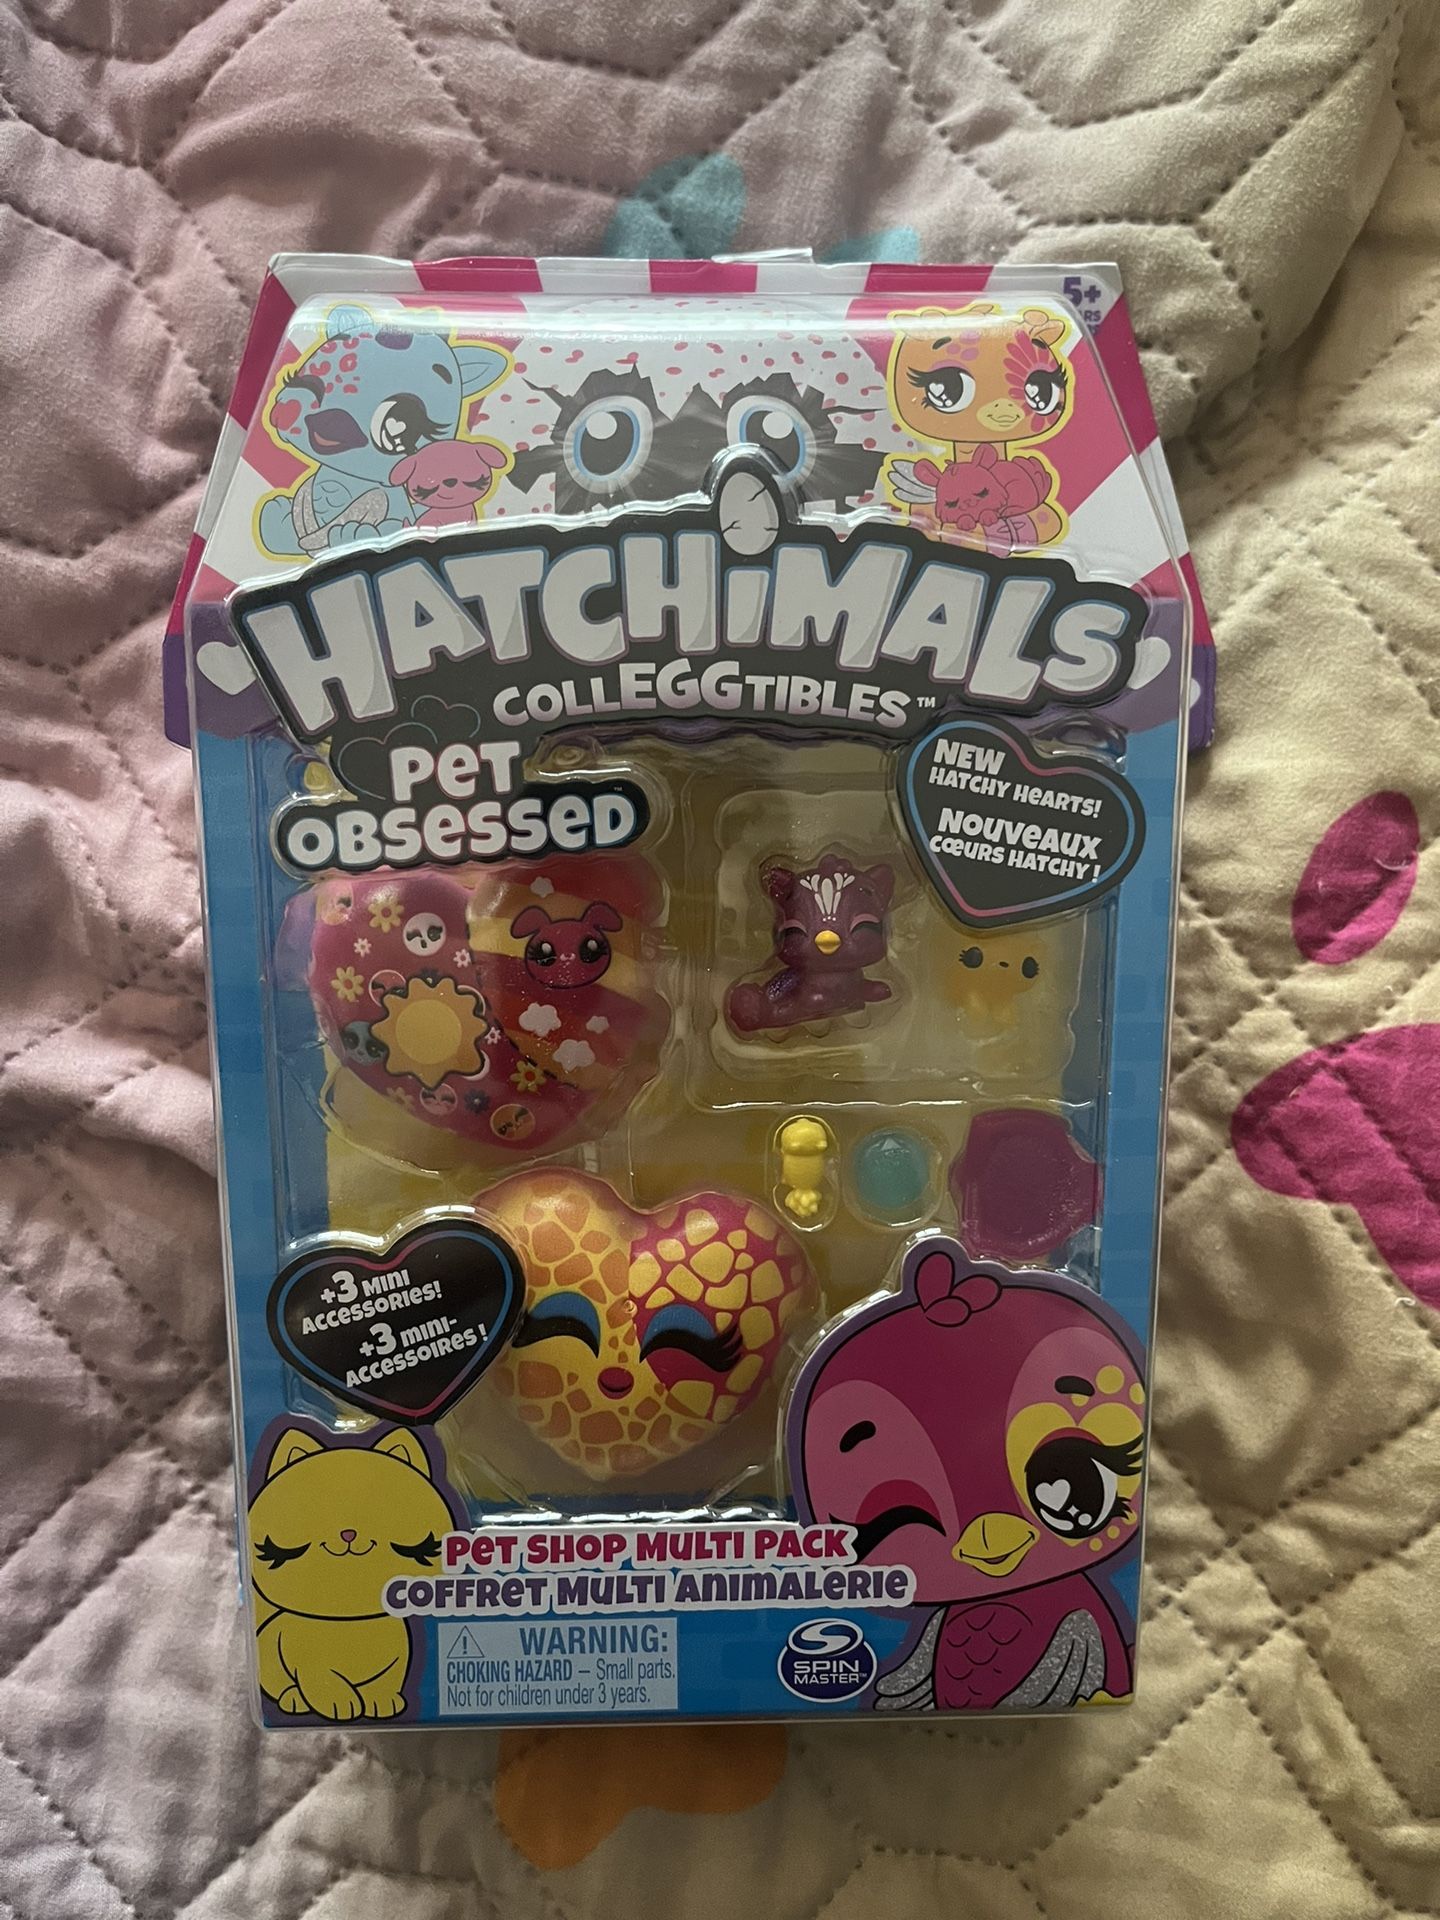 HATCHIMALS COLLEGGTIBLES- Pet Obsessed-Pet Shop Multi Pack New Hatchy Hearts